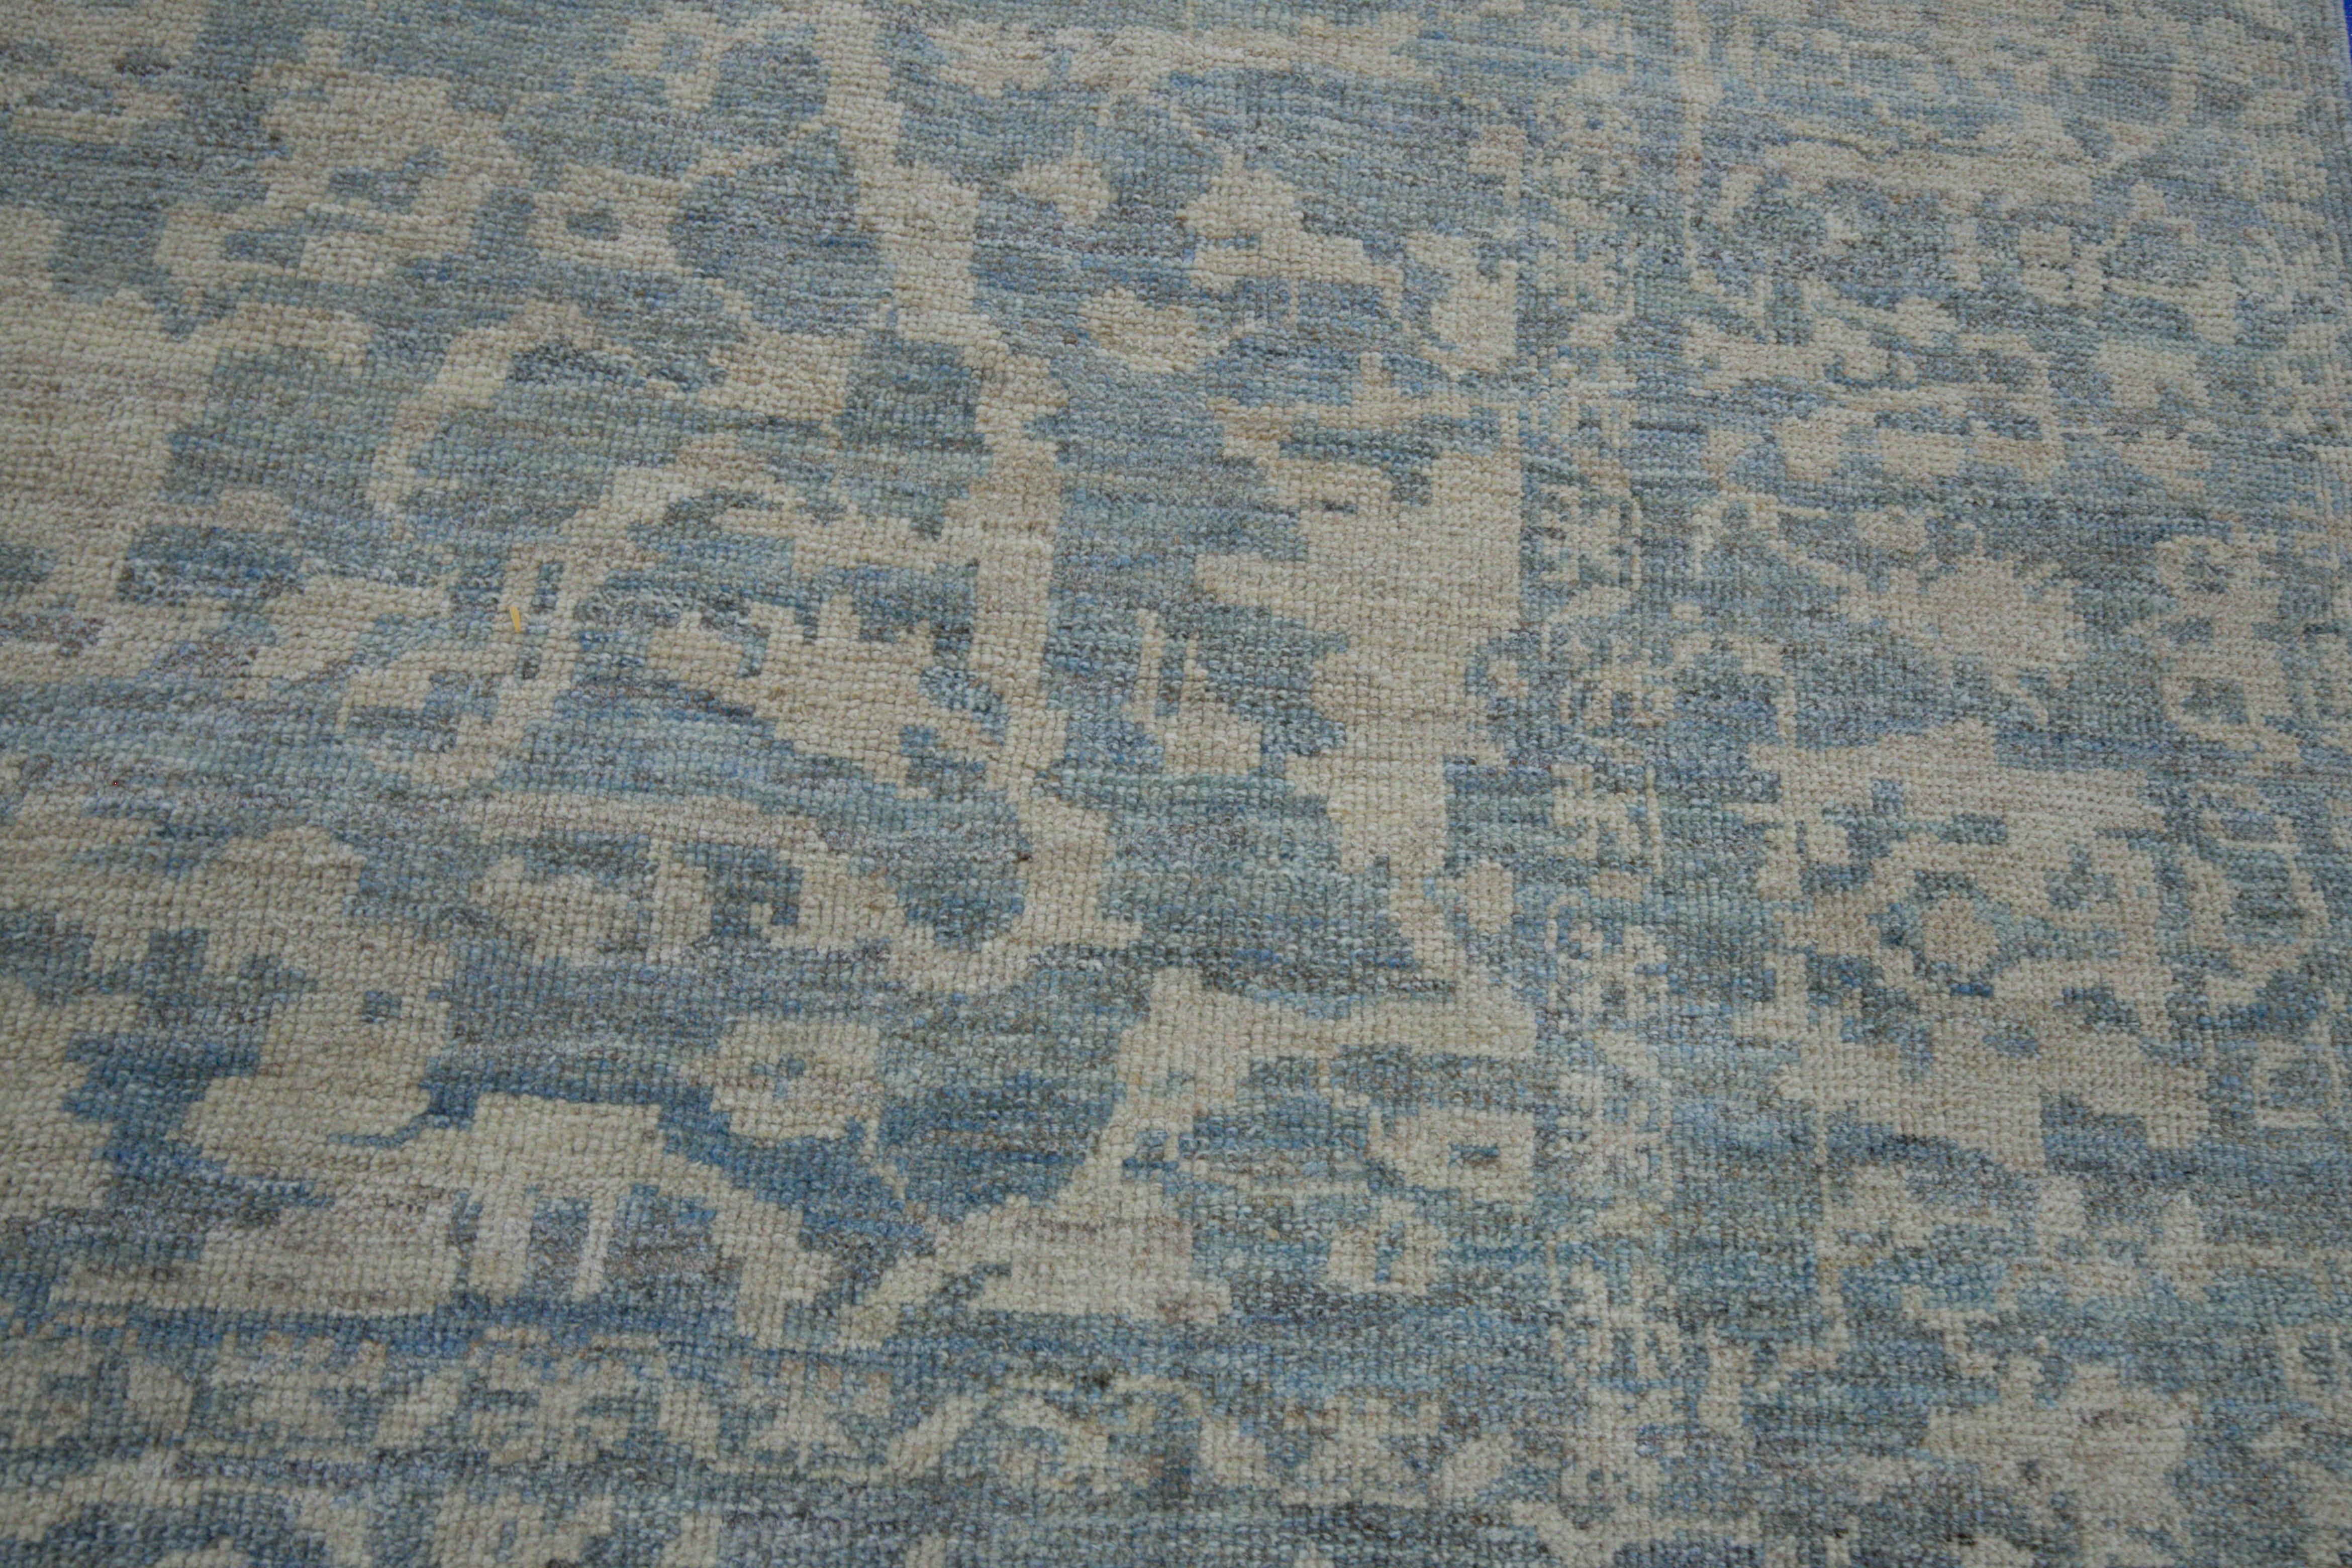 Hand-Woven Contemporary Turkish Oushak Rug with Beige Field and Blue Flower Patterns